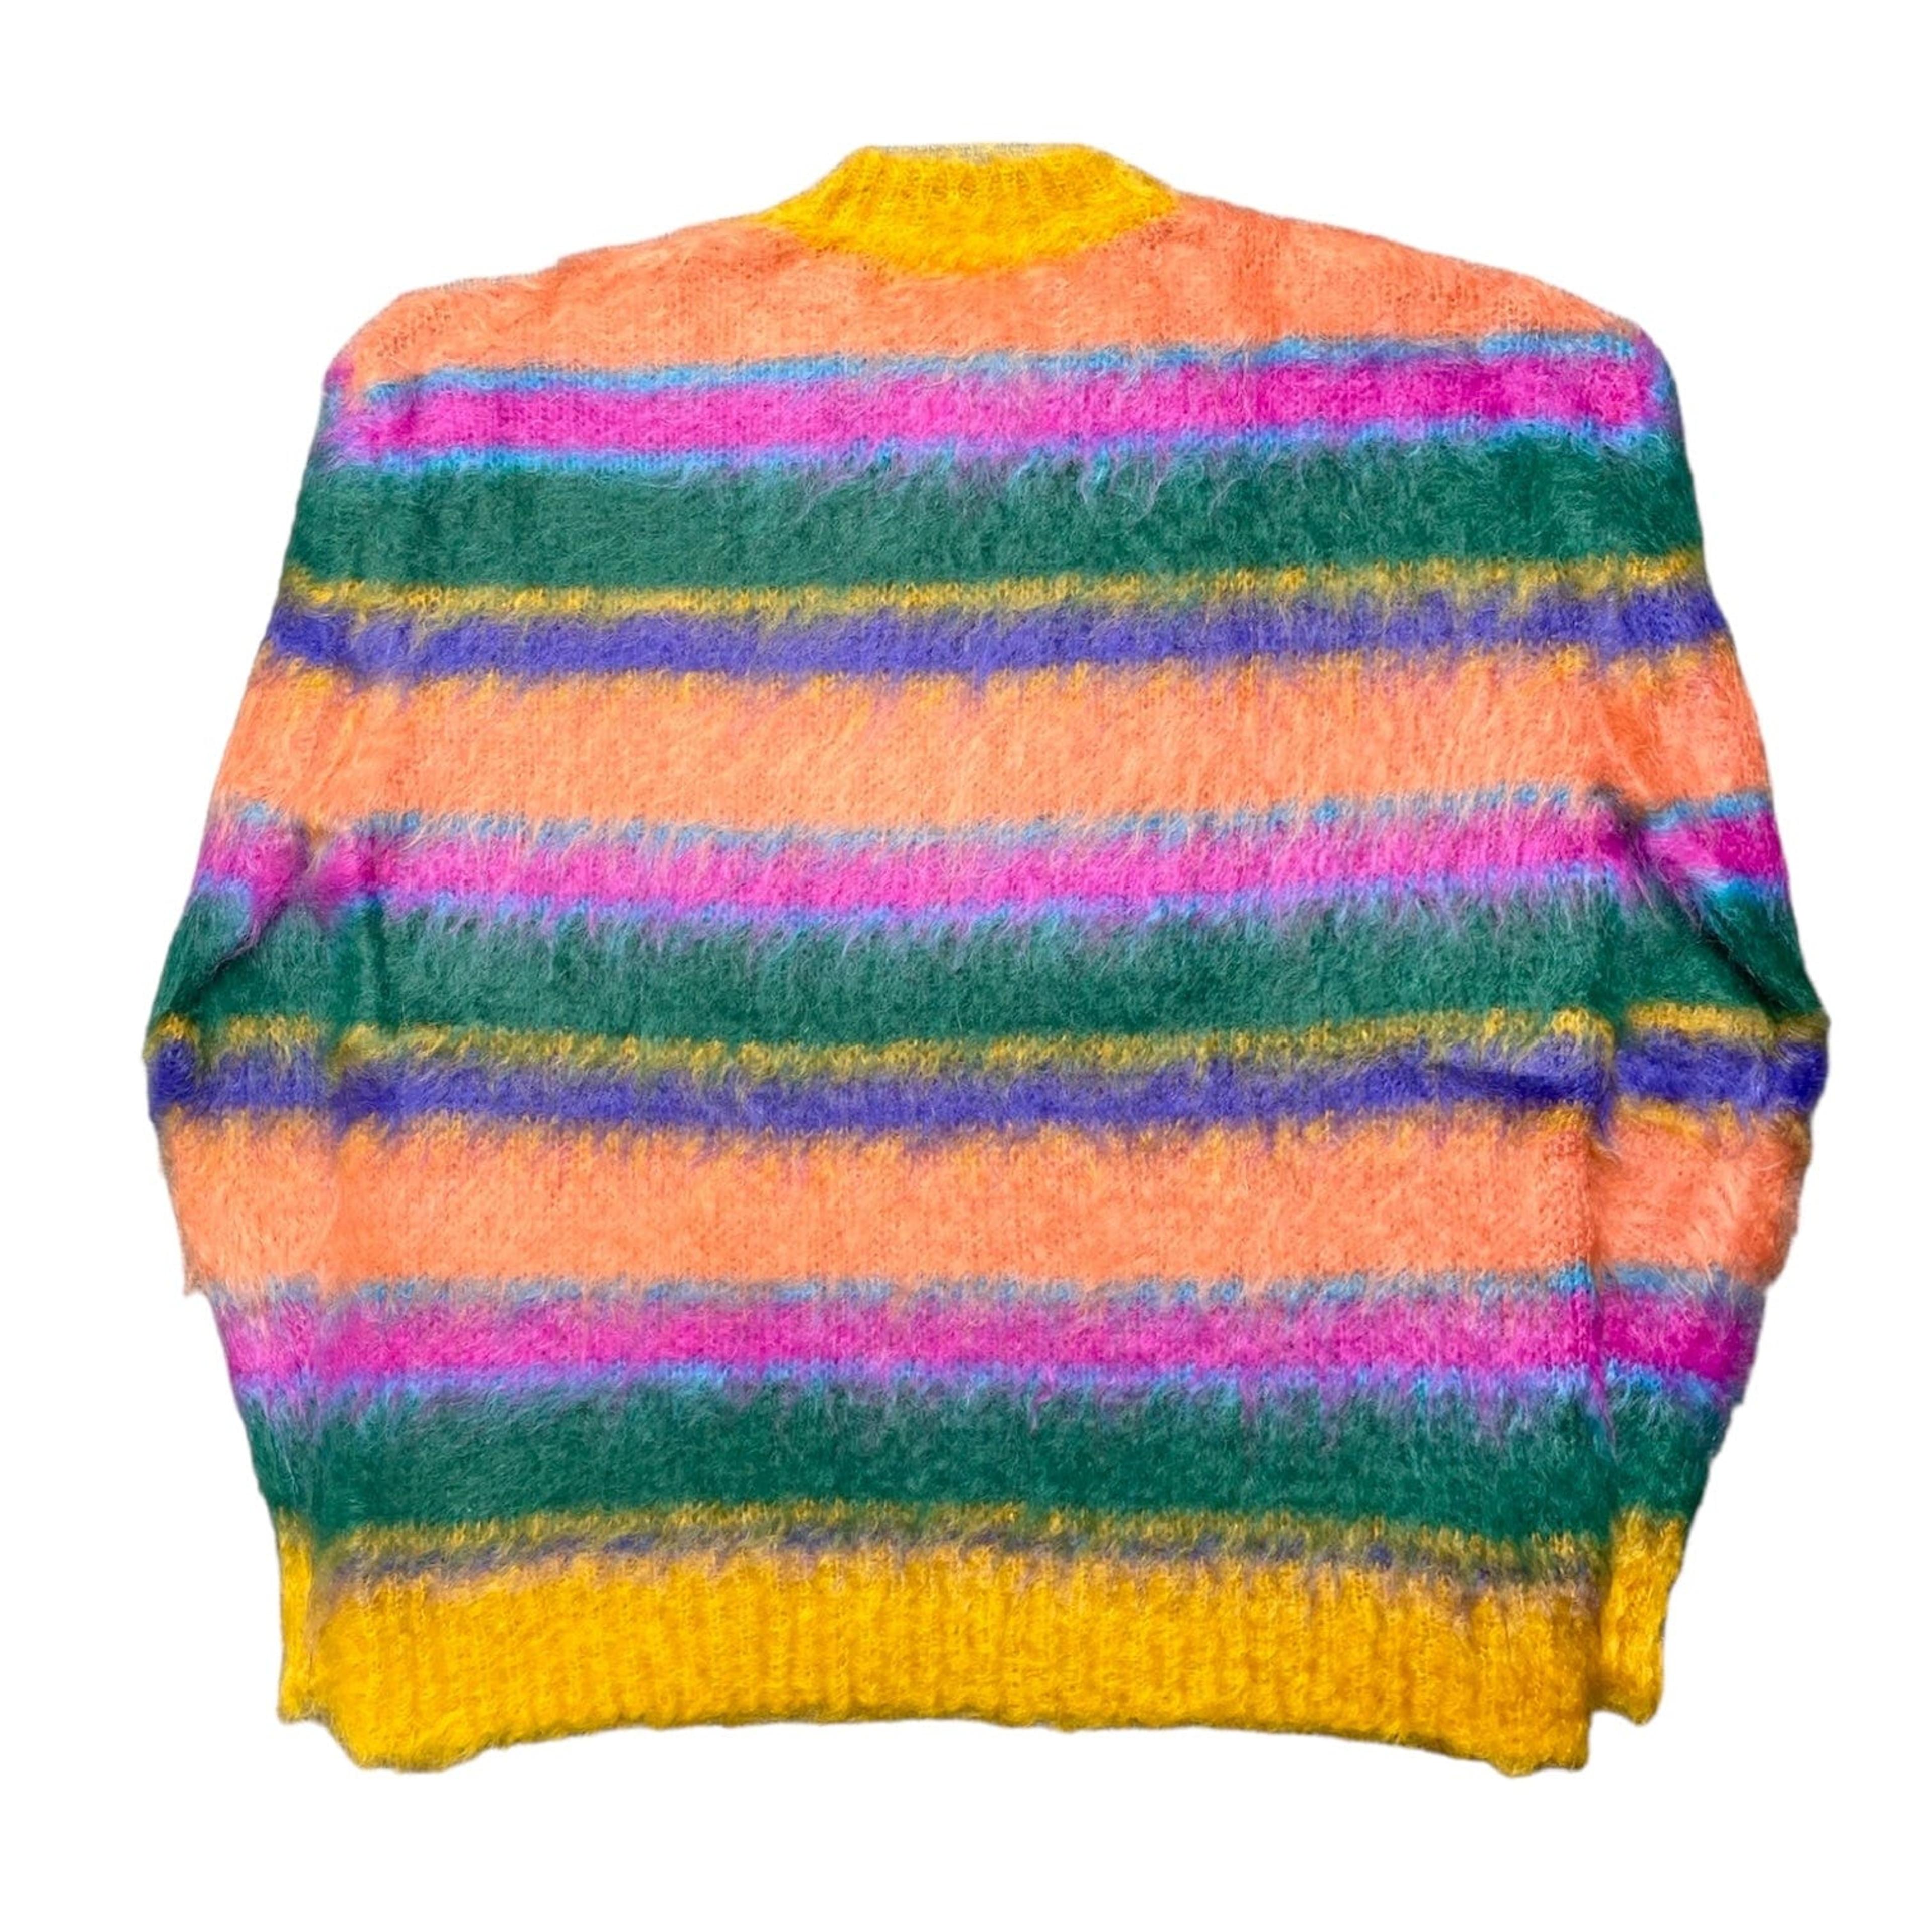 Alternate View 1 of Marni Striped Brushed Mohair Sweater Orange Pink